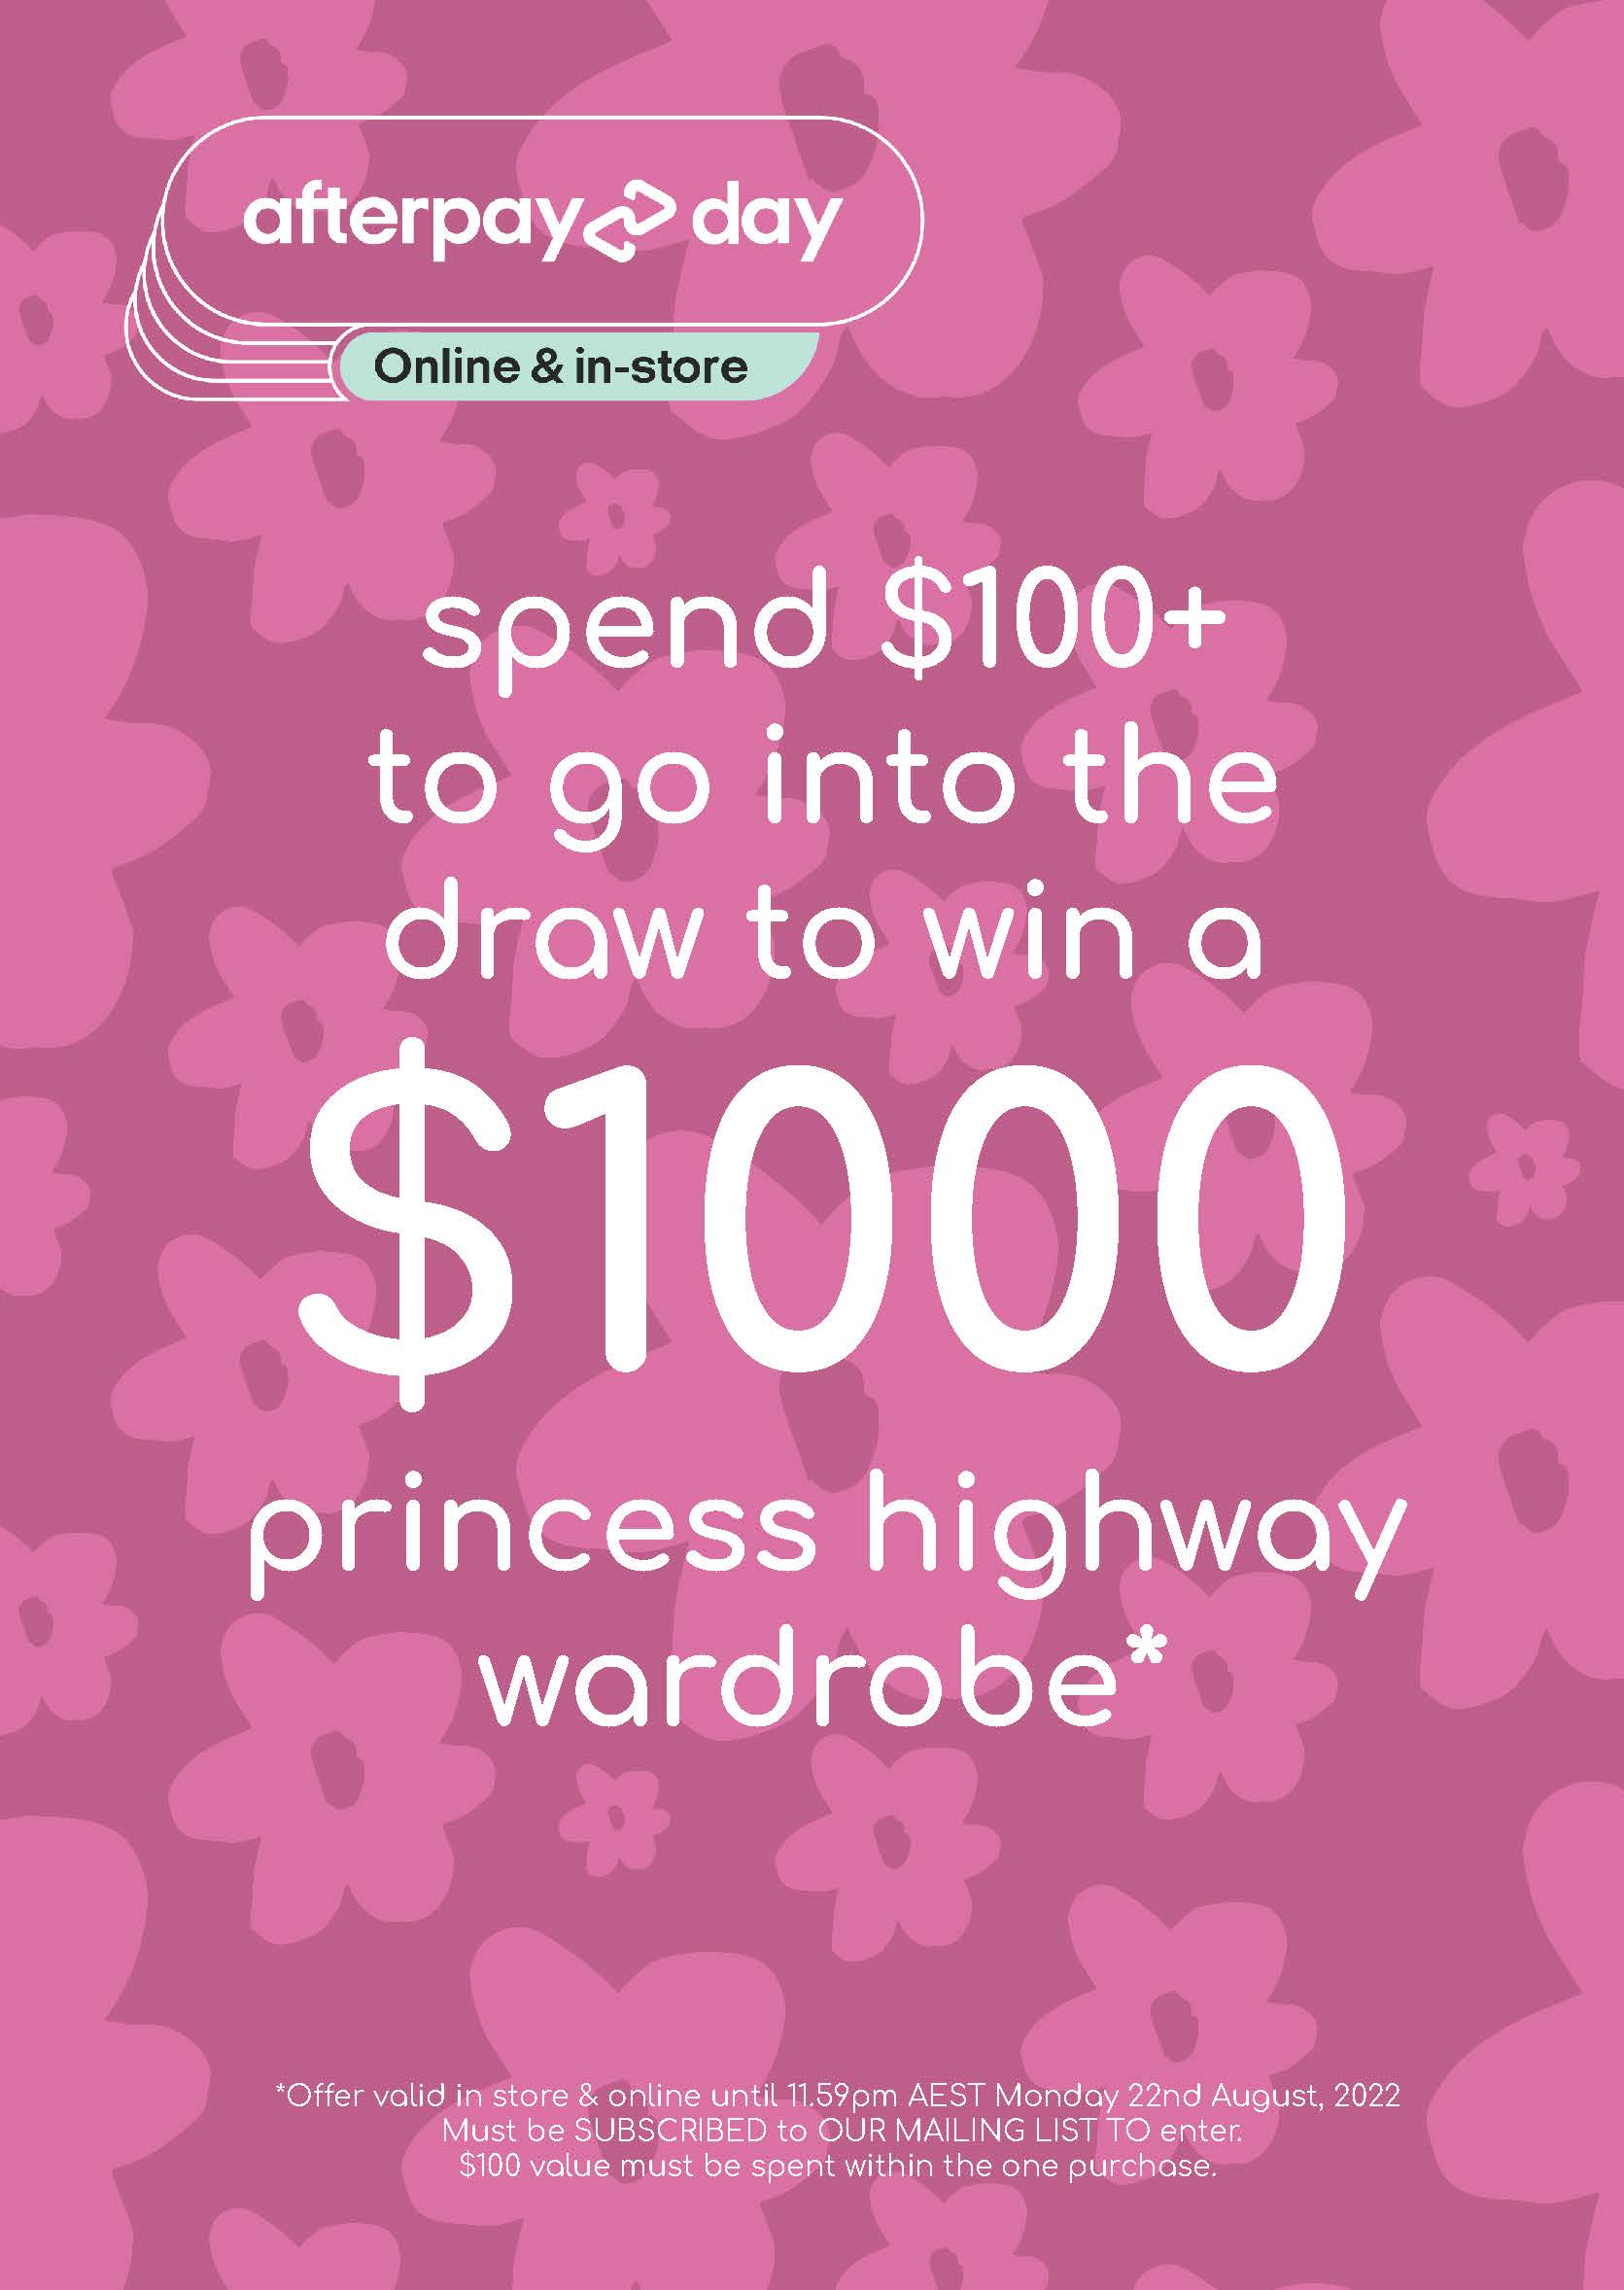 Win a $1000 Wardrobe for Afterpay Day – Princess Highway